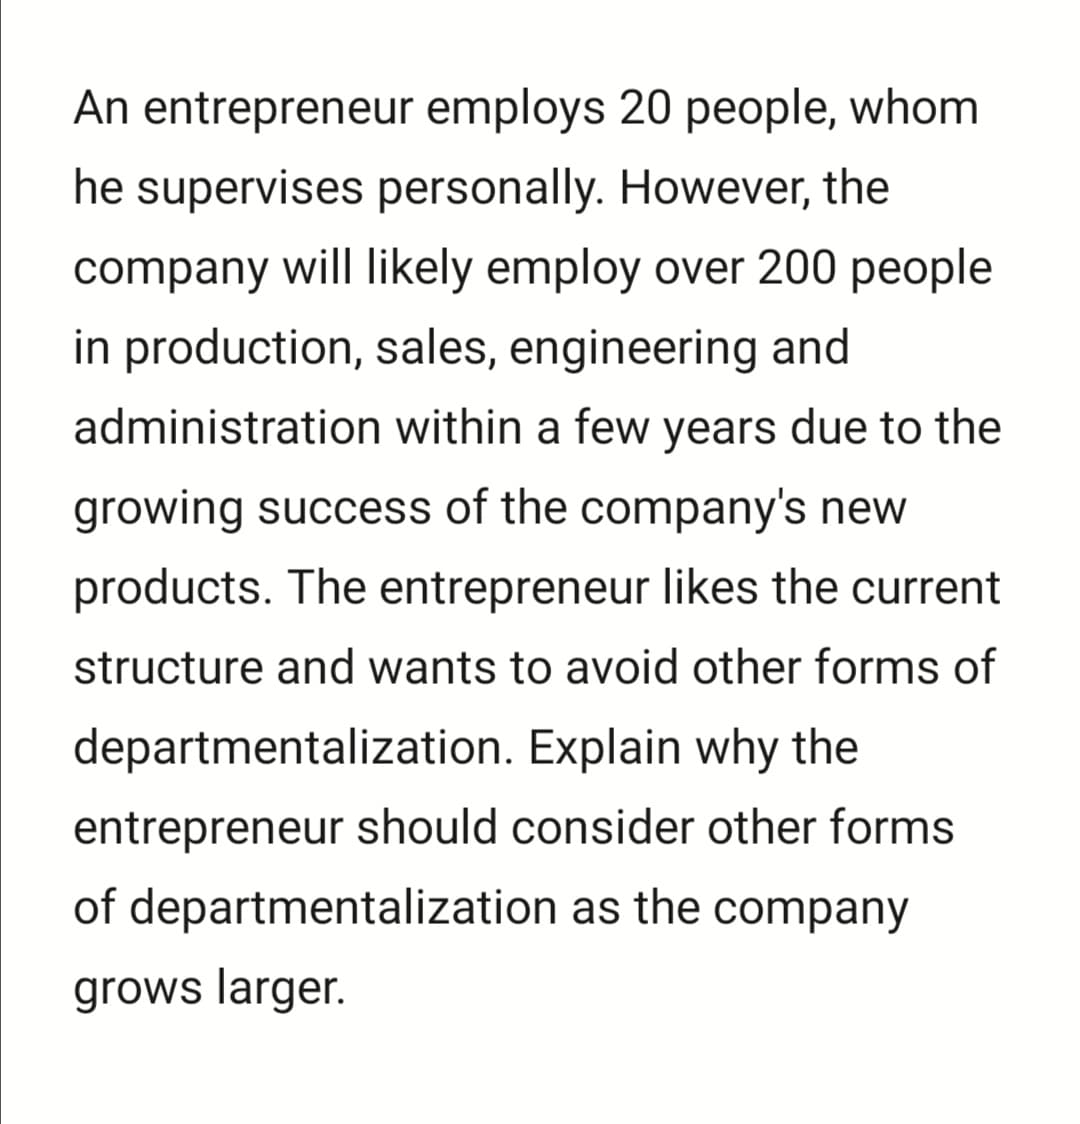 An entrepreneur employs 20 people, whom
he supervises personally. However, the
company will likely employ over 200 people
in production, sales, engineering and
administration within a few years due to the
growing success of the company's new
products. The entrepreneur likes the current
structure and wants to avoid other forms of
departmentalization. Explain why the
entrepreneur should consider other forms
of departmentalization as the company
grows larger.
